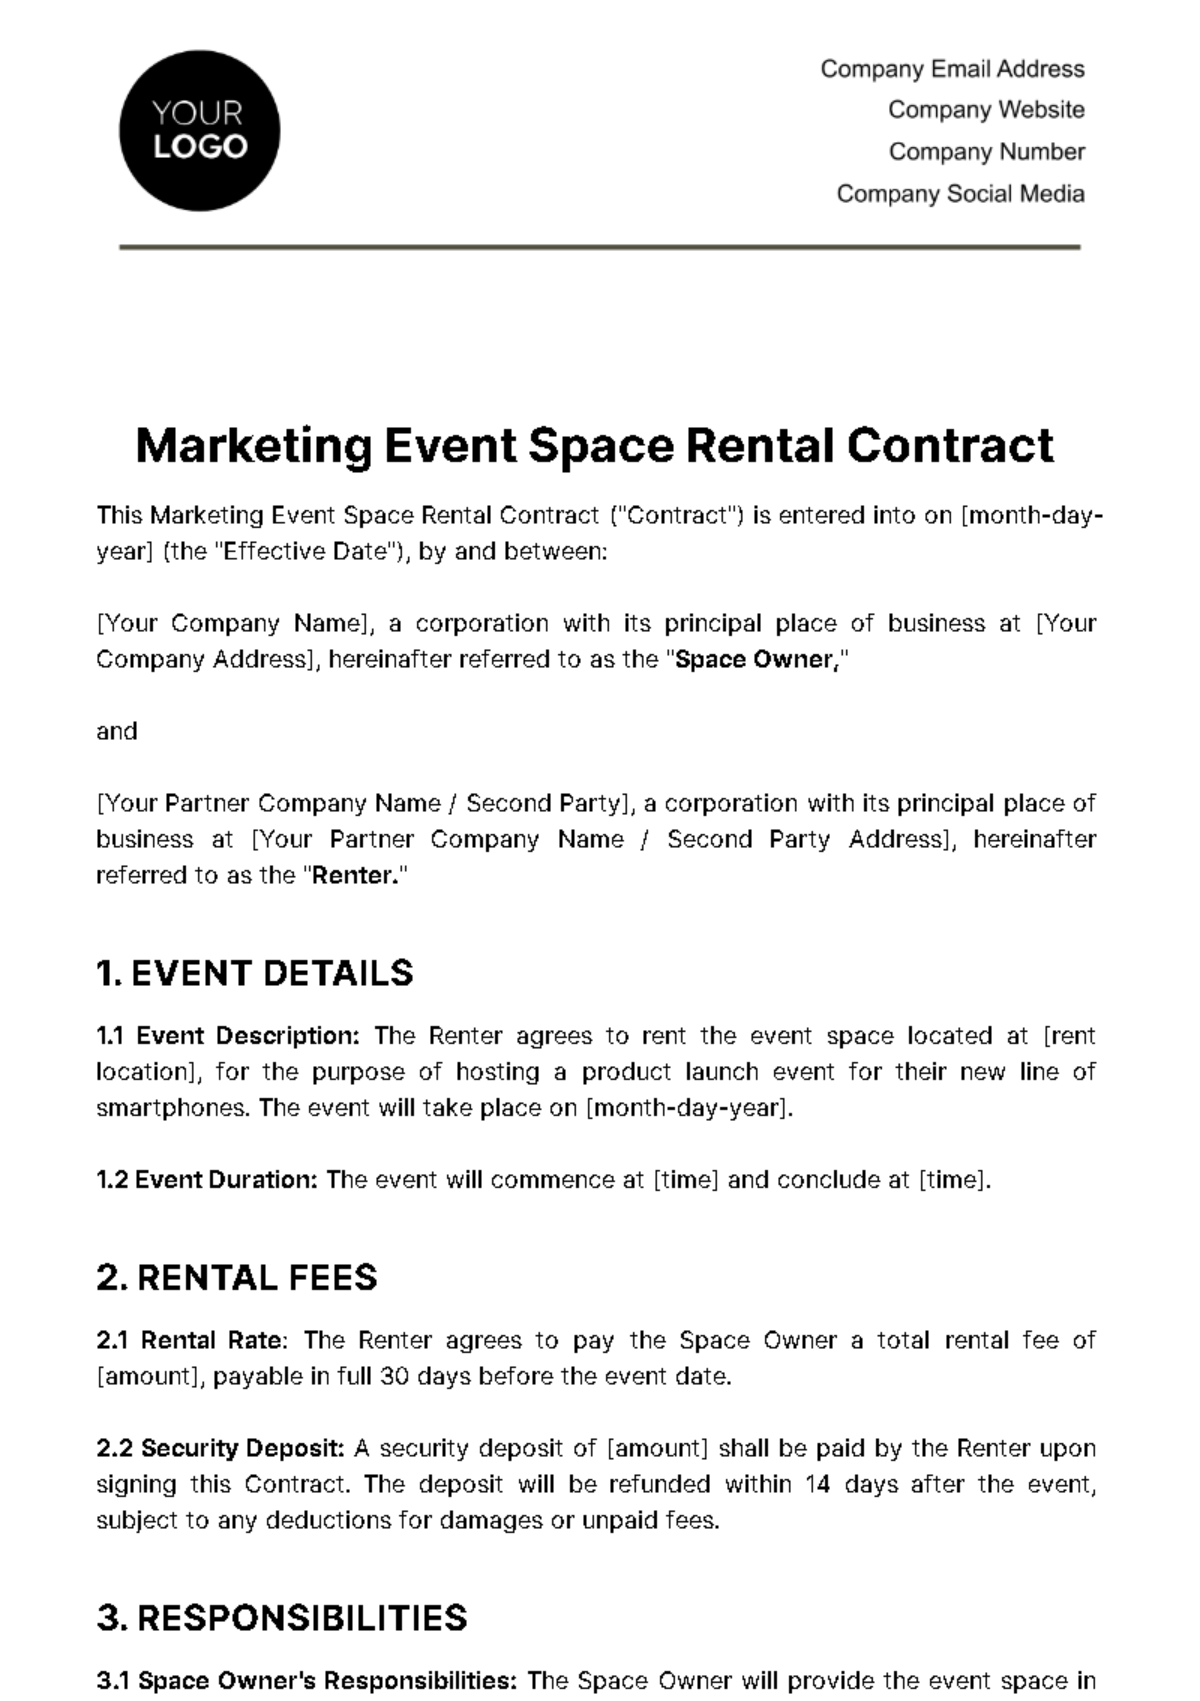 Free Marketing Event Space Rental Contract Template